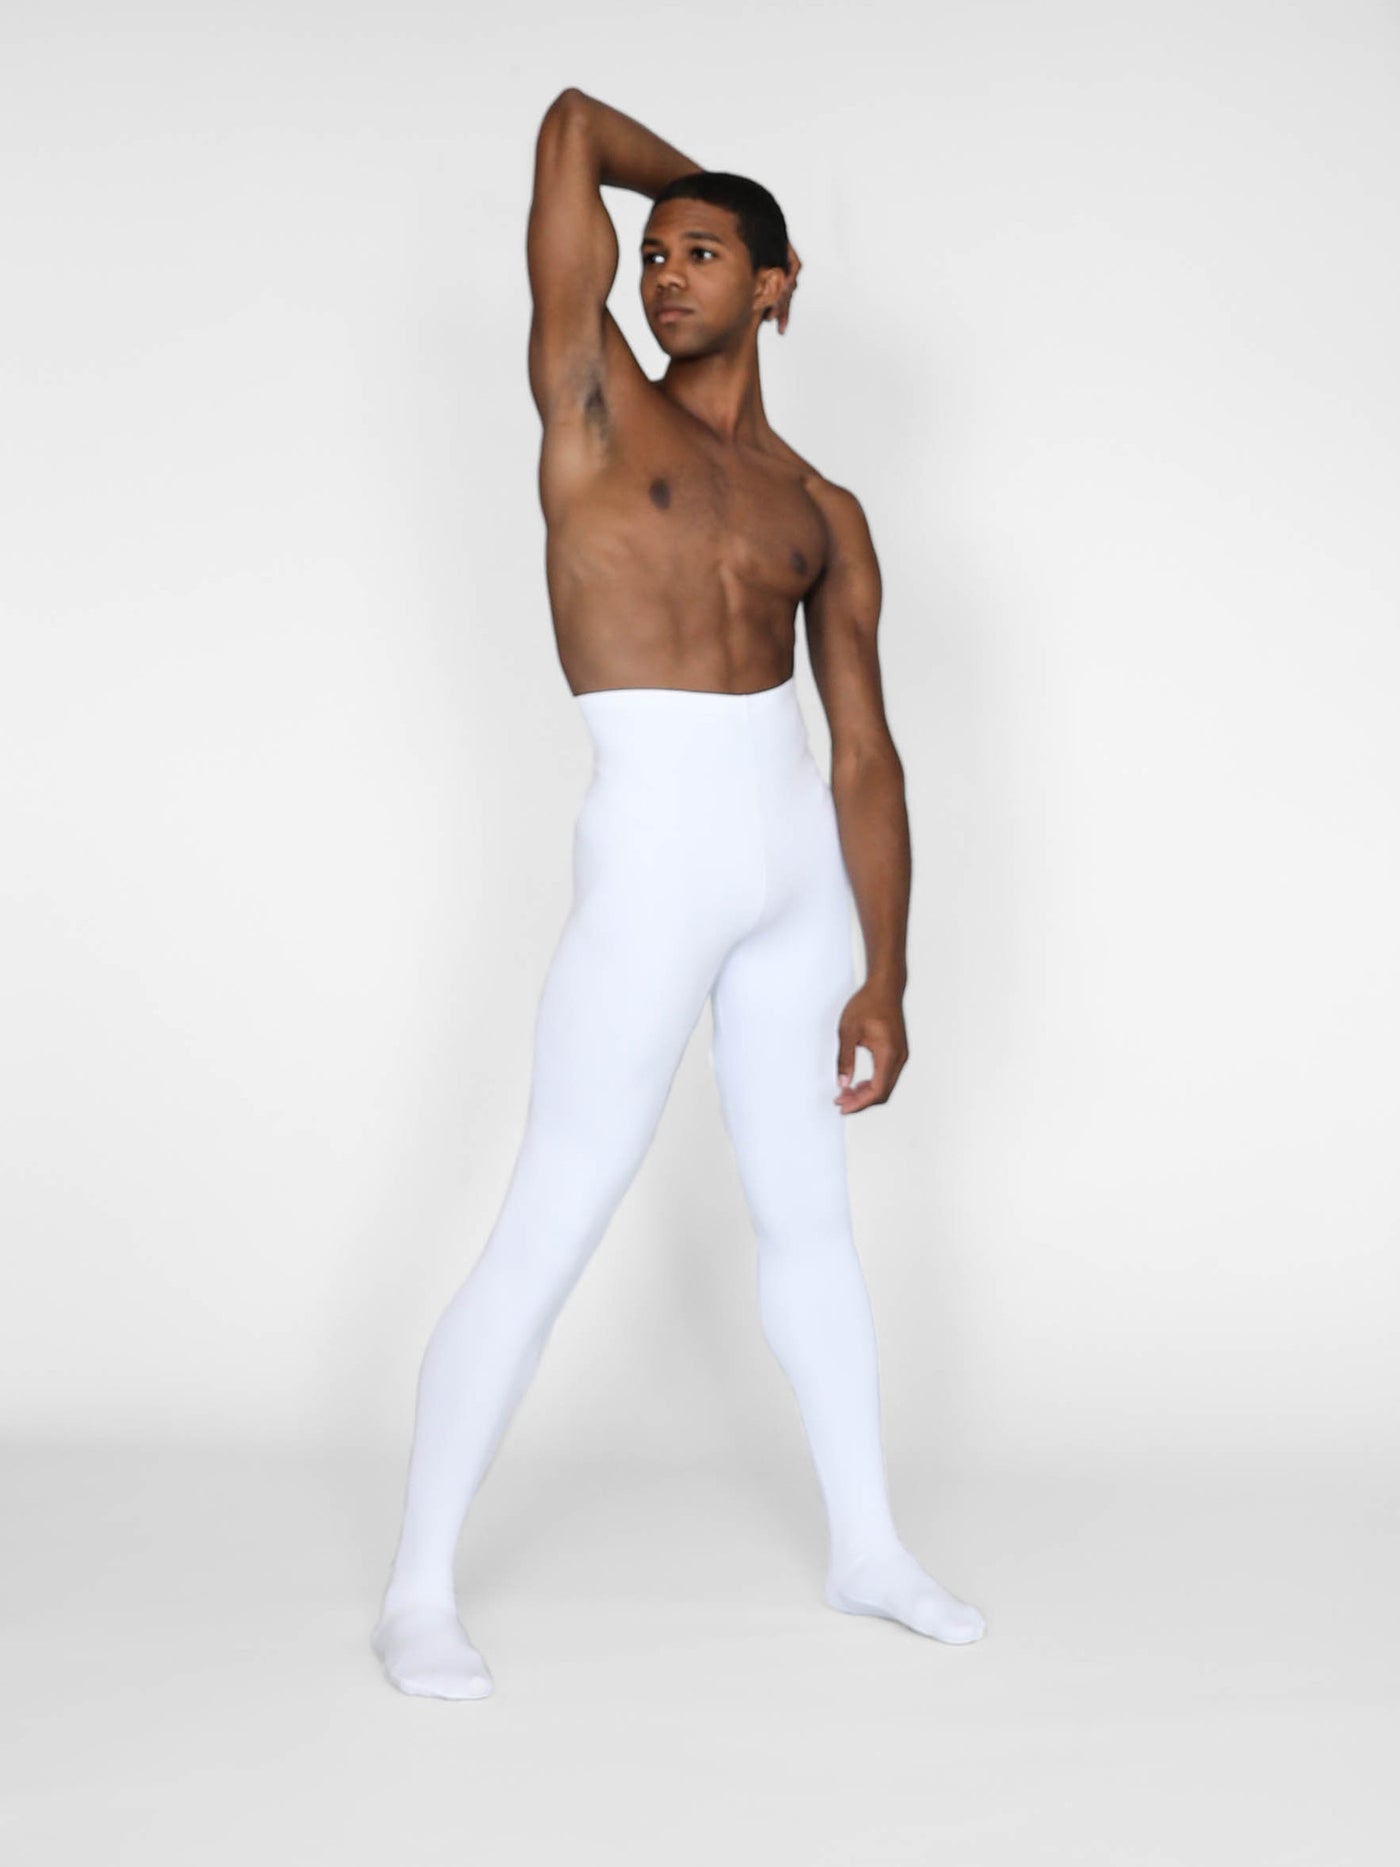 Opaque white dance tights for men by boysdancetoo the dance store for men